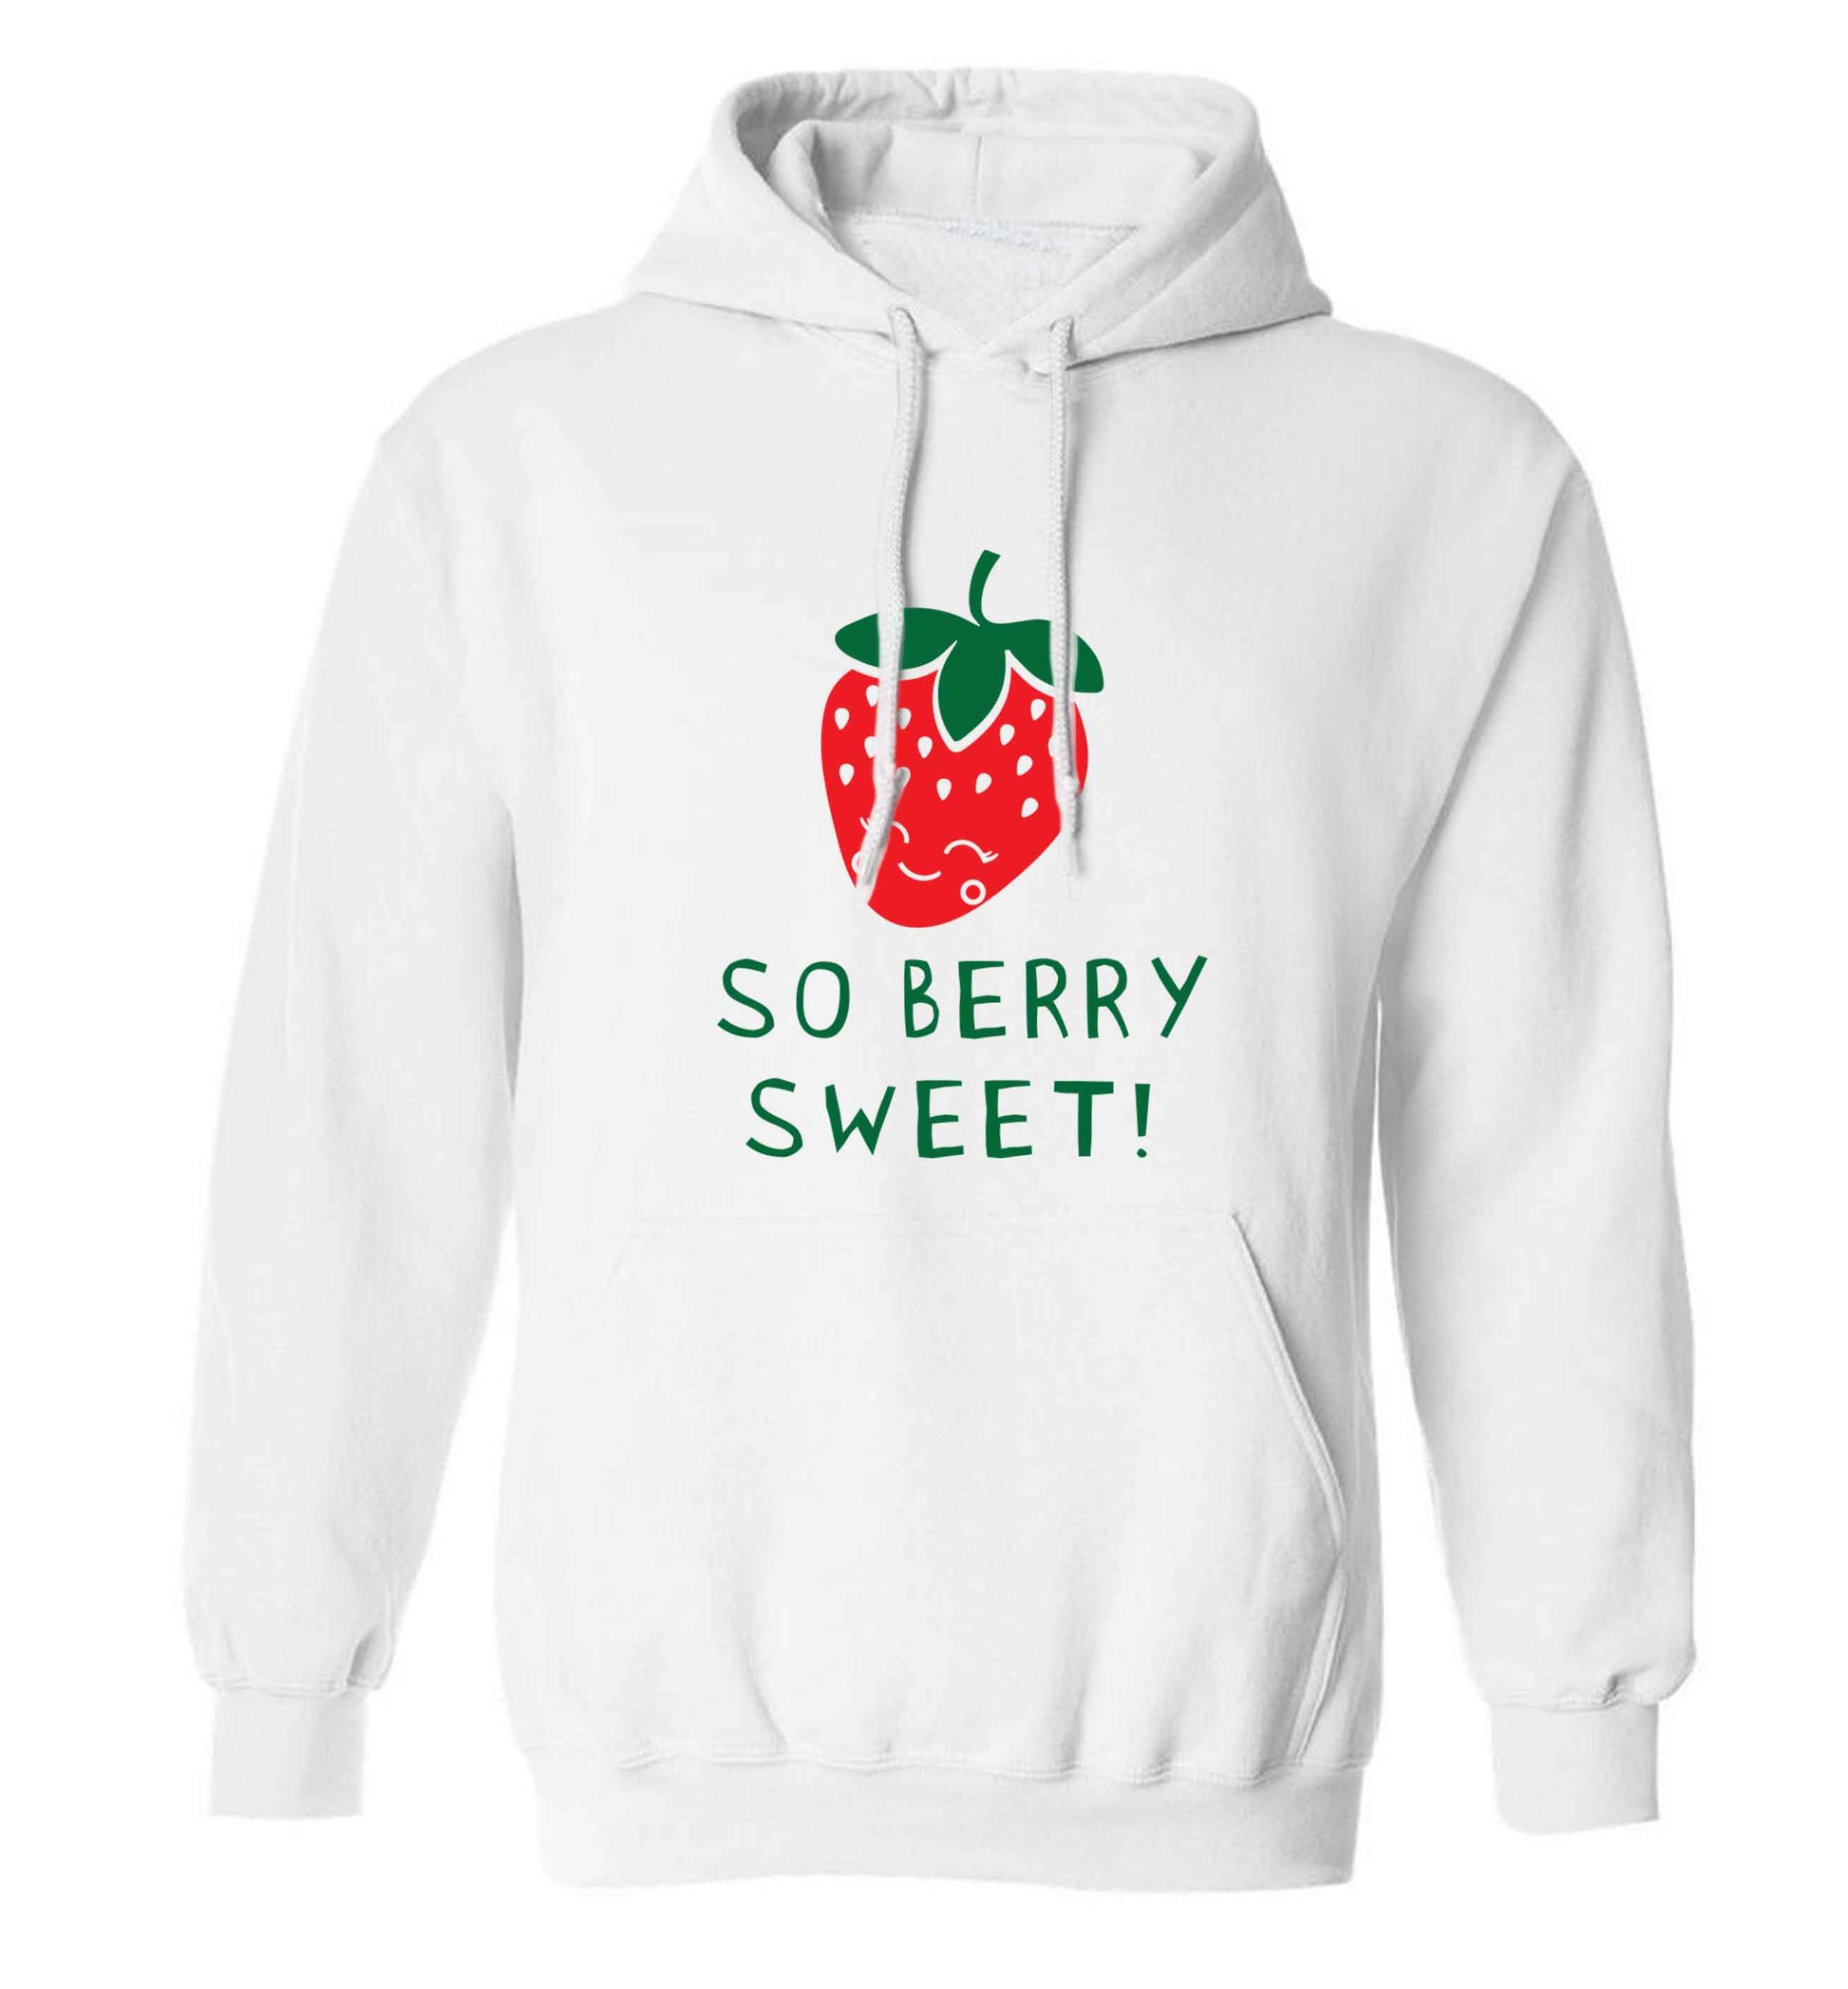 So berry sweet adults unisex white hoodie 2XL